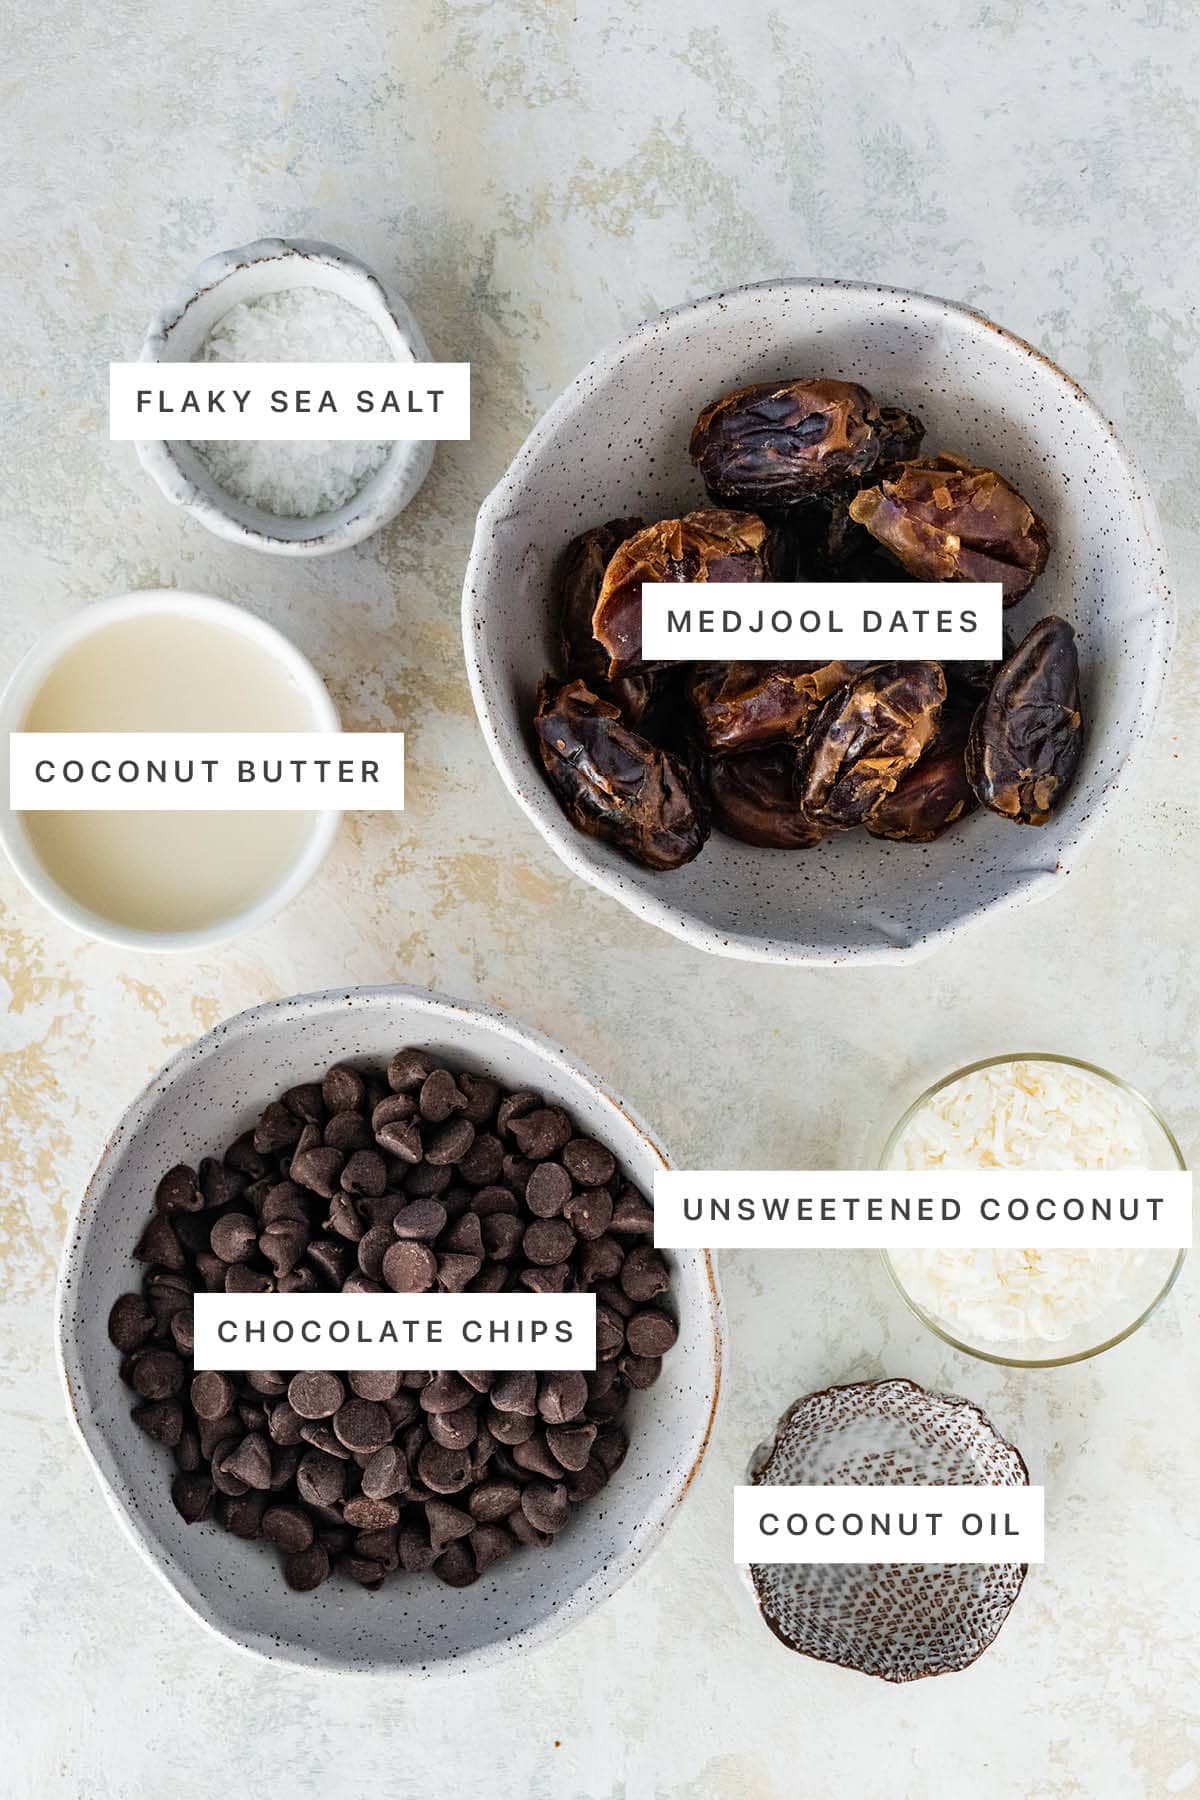 Ingredients measured out to make Date Mounds Bars: flaky sea salt, medjool dates, coconut butter, unsweetened coconut, chocolate chips and coconut oil.